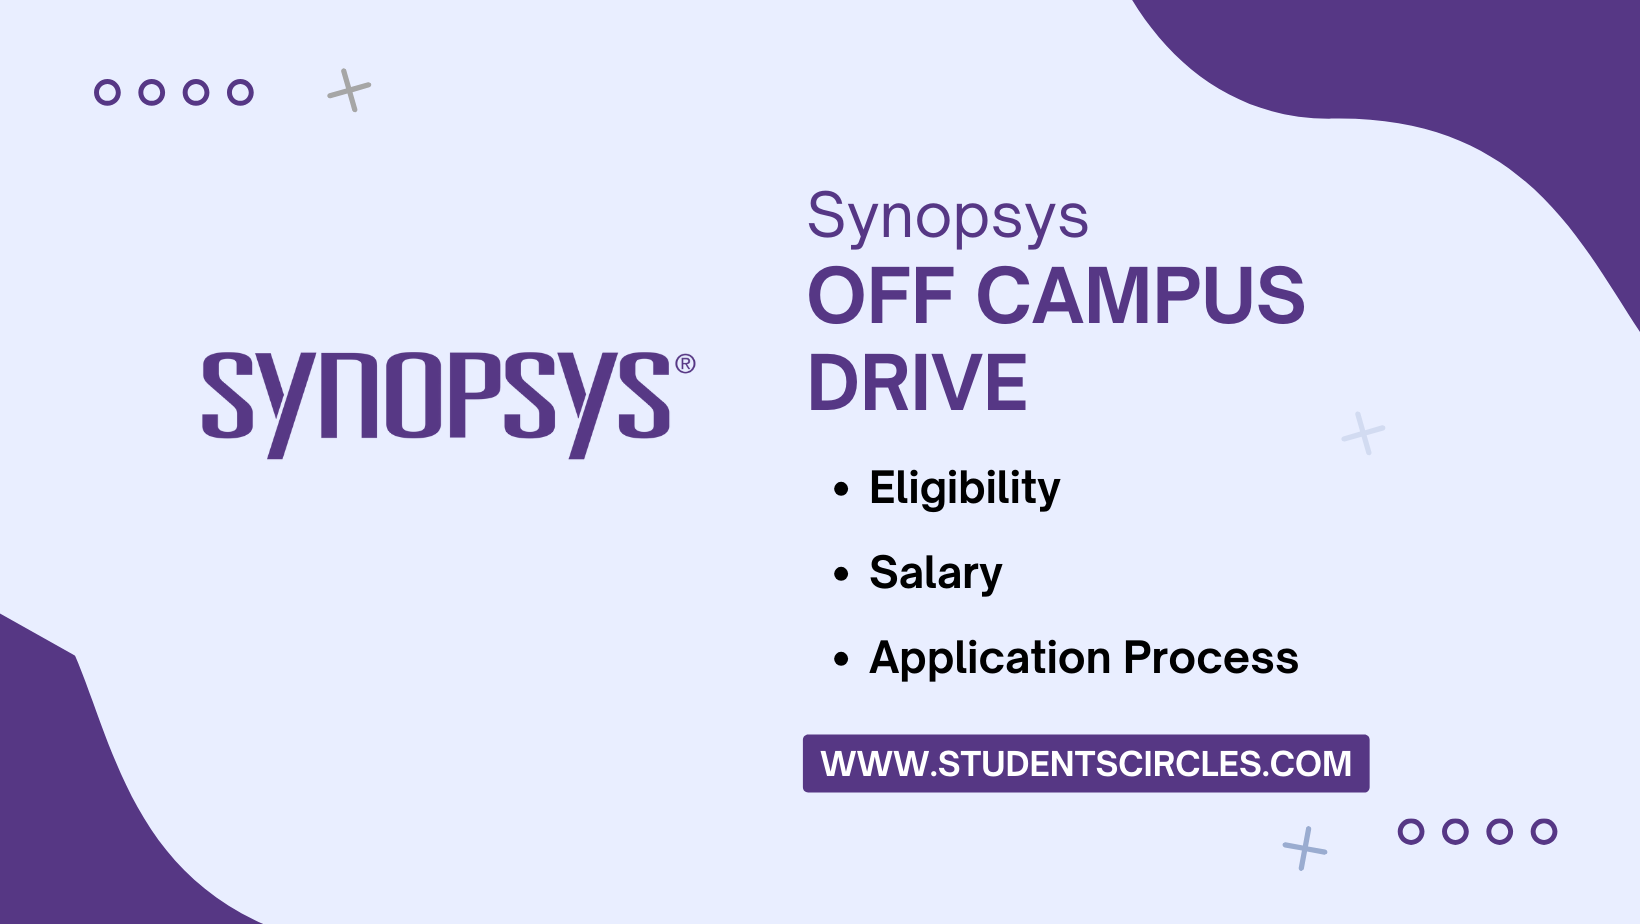 Synopsys Off Campus Drive